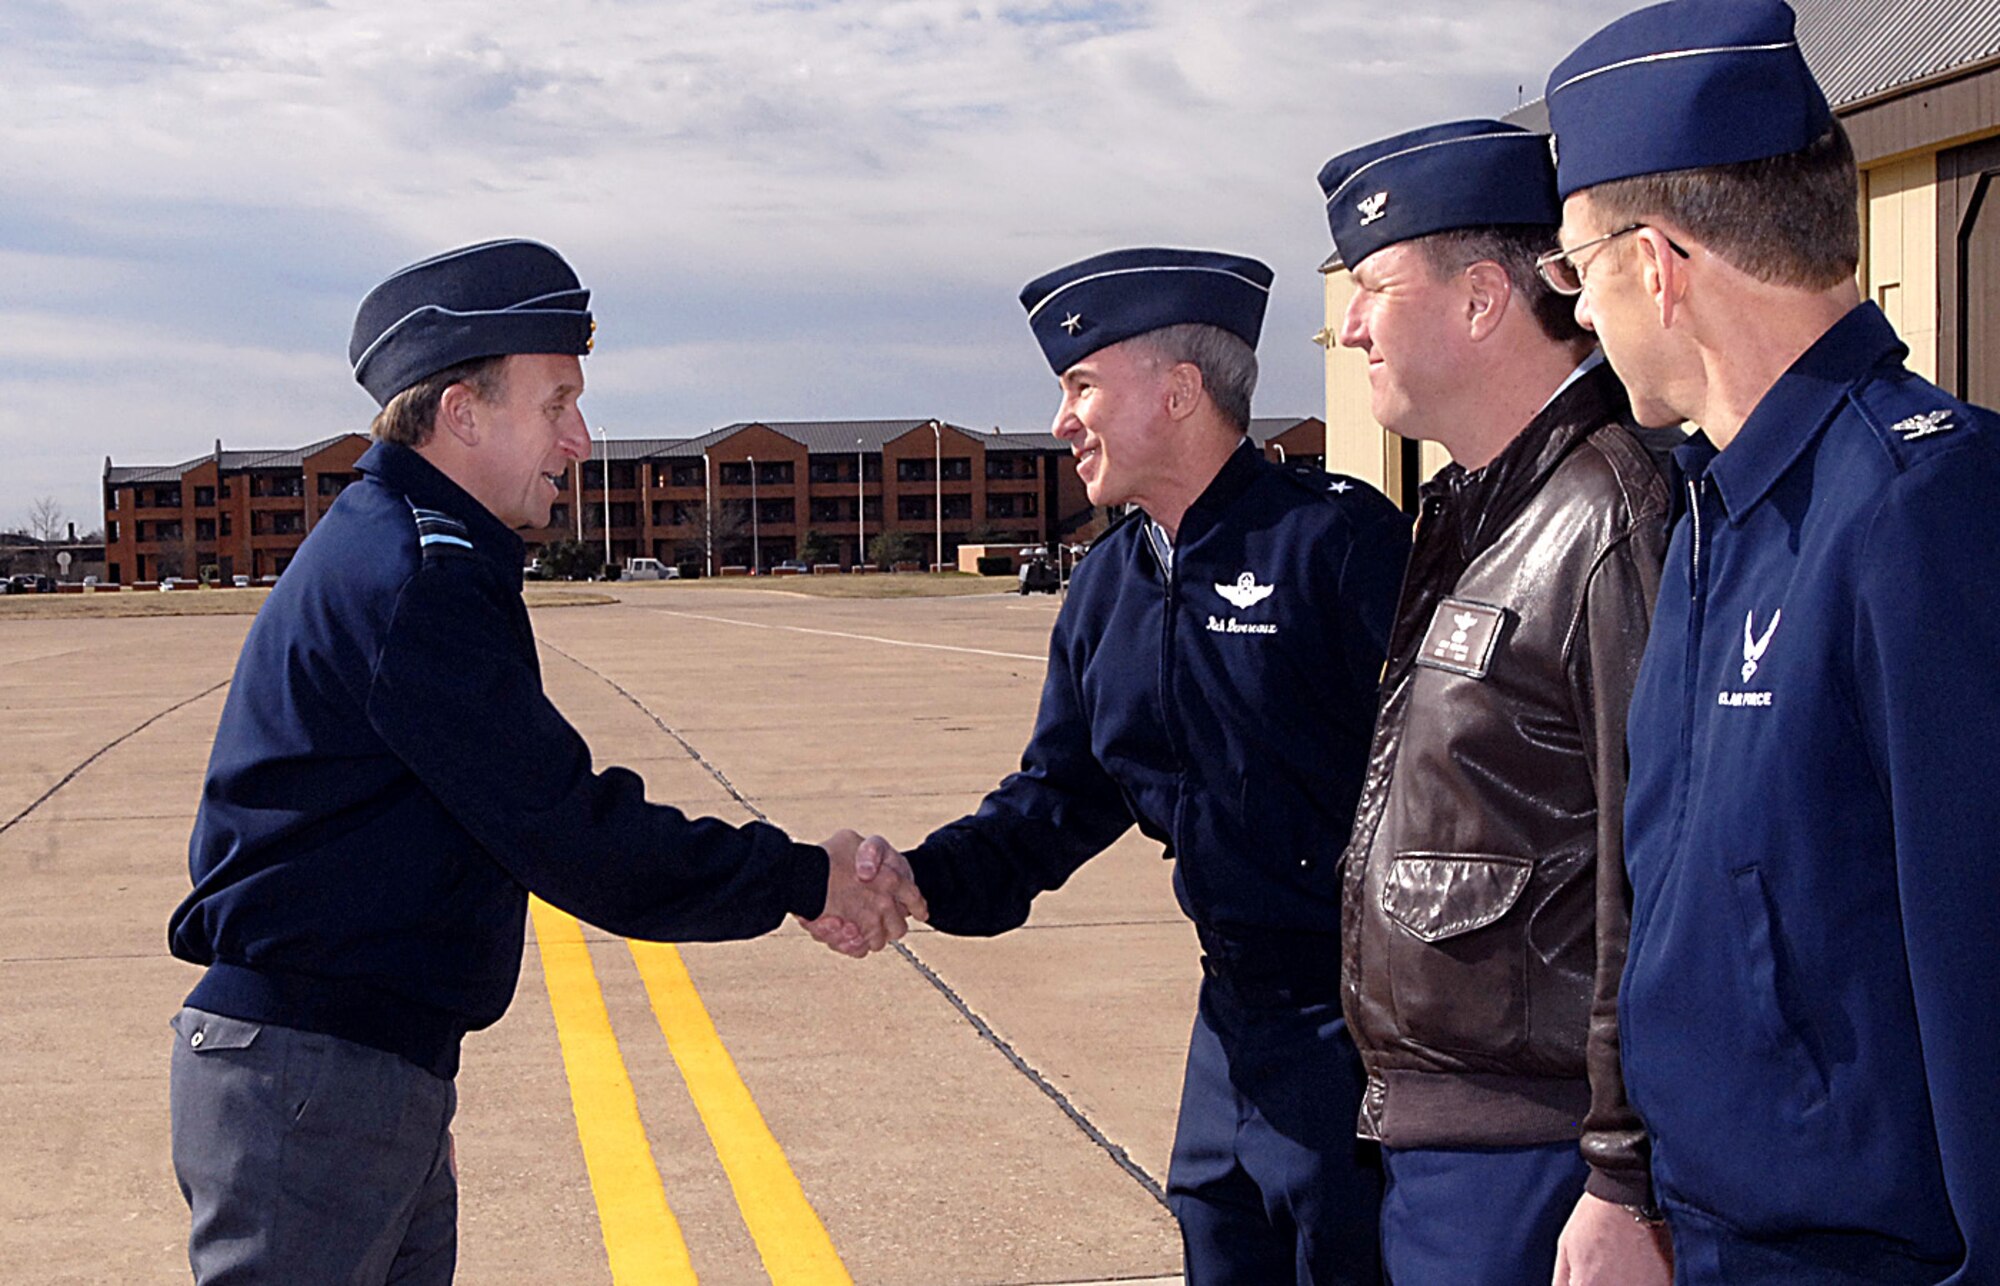 Brig. Gen. Richard Devereaux, 82nd Training Wing commander, greets British Royal Air Force Air Marshal Barry Thornton, Commander in Chief of Personnel and Training Command upon his arrival at Sheppard Air Force Base, Texas, March 6. The air marshal was also greeted by Col. Jeffery Kendall, 80th Flying Training Wing Commander, and Col. Lansen Conley, 82nd TRW vice commander. Air Marshal Thornton spent the day at Sheppard visiting training locations across base. (U.S. Air Force photo/Harry Tonemah)